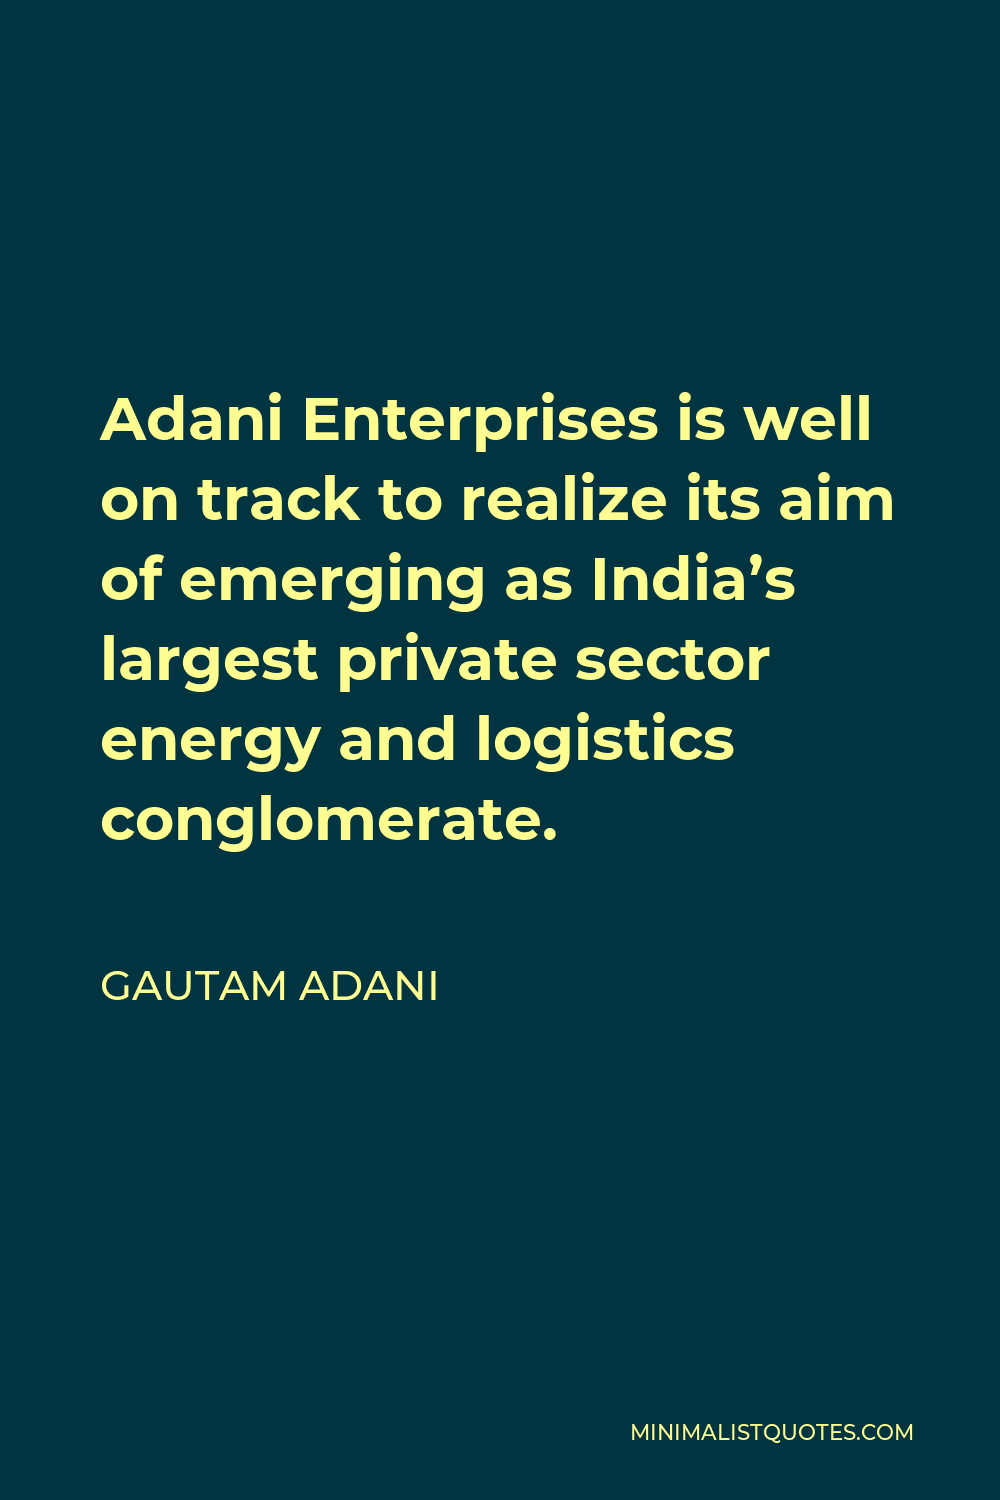 Gautam Adani Quote - Adani Enterprises is well on track to realize its aim of emerging as India’s largest private sector energy and logistics conglomerate.